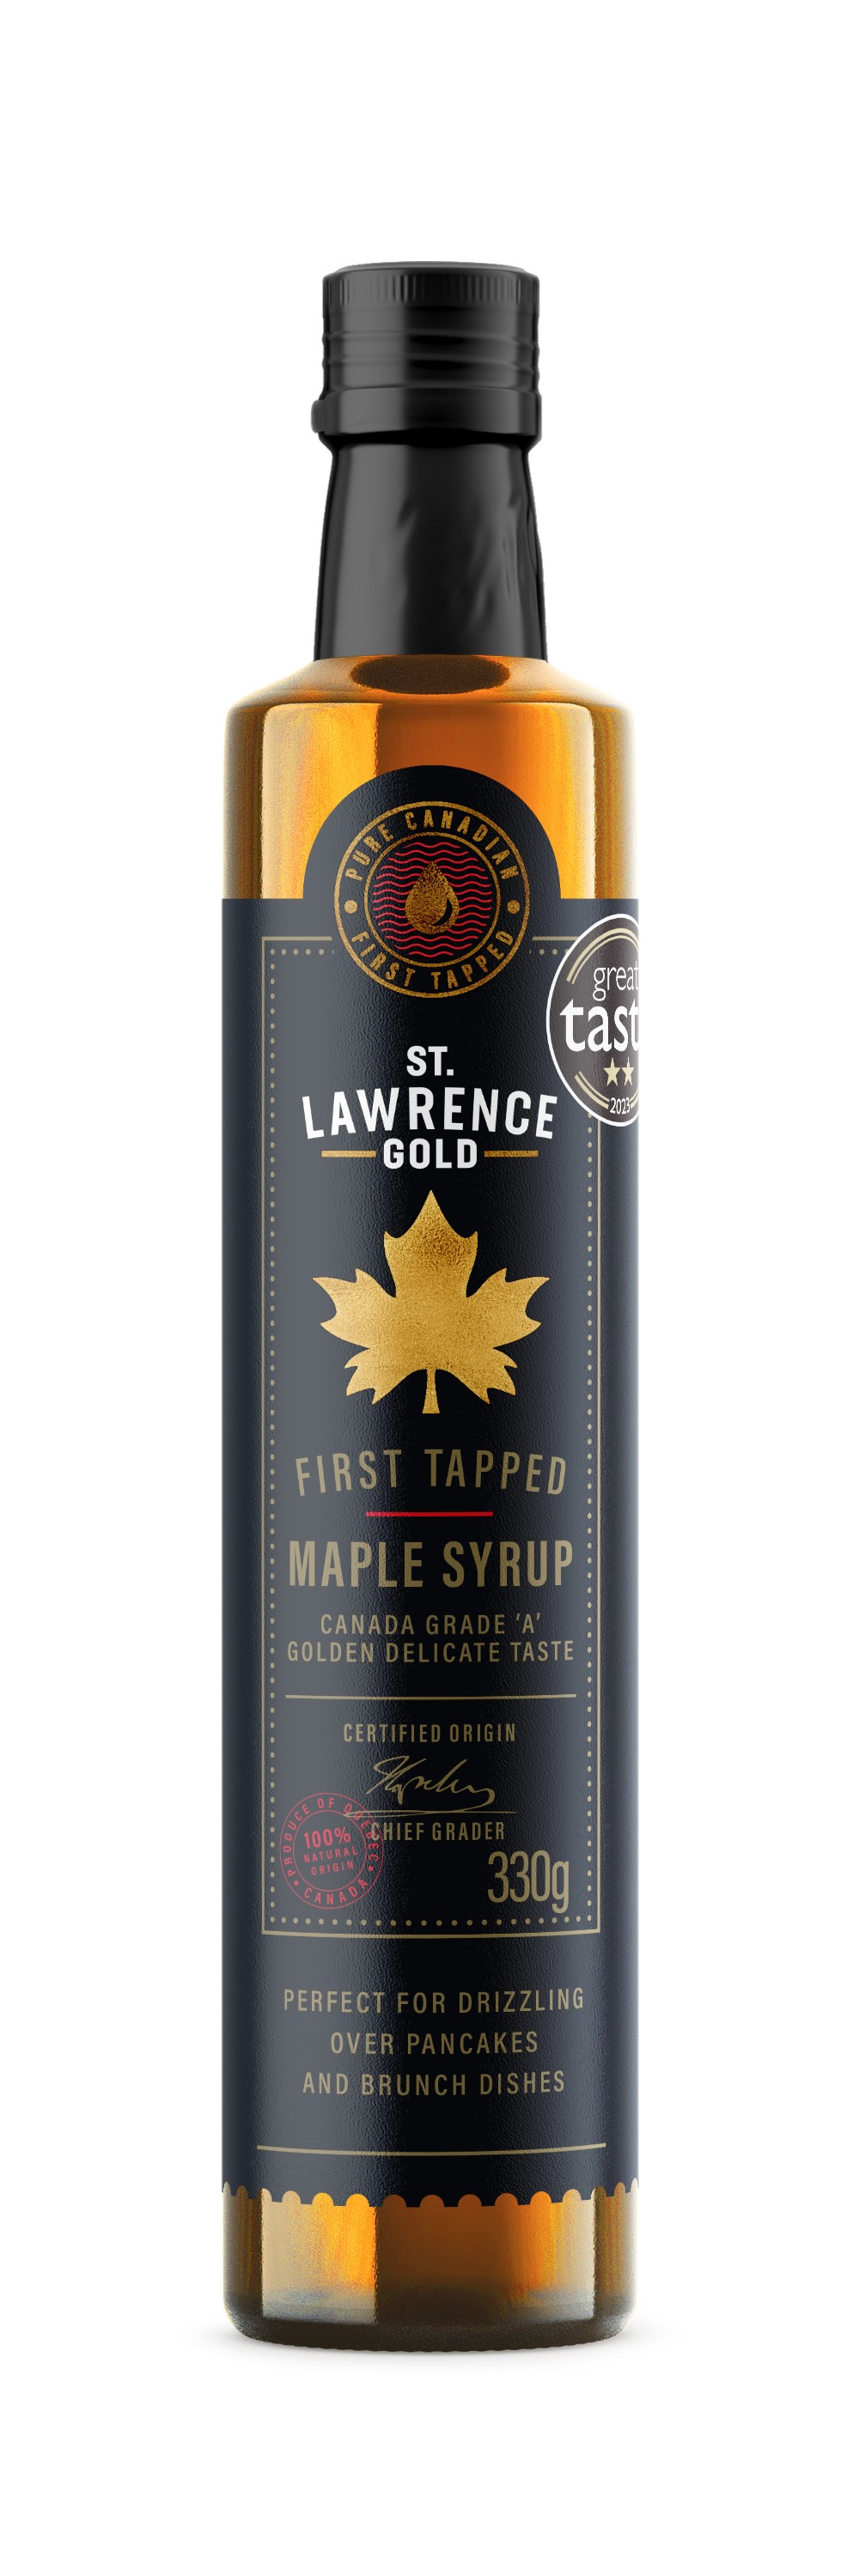 Limited Edition Maple Syrup